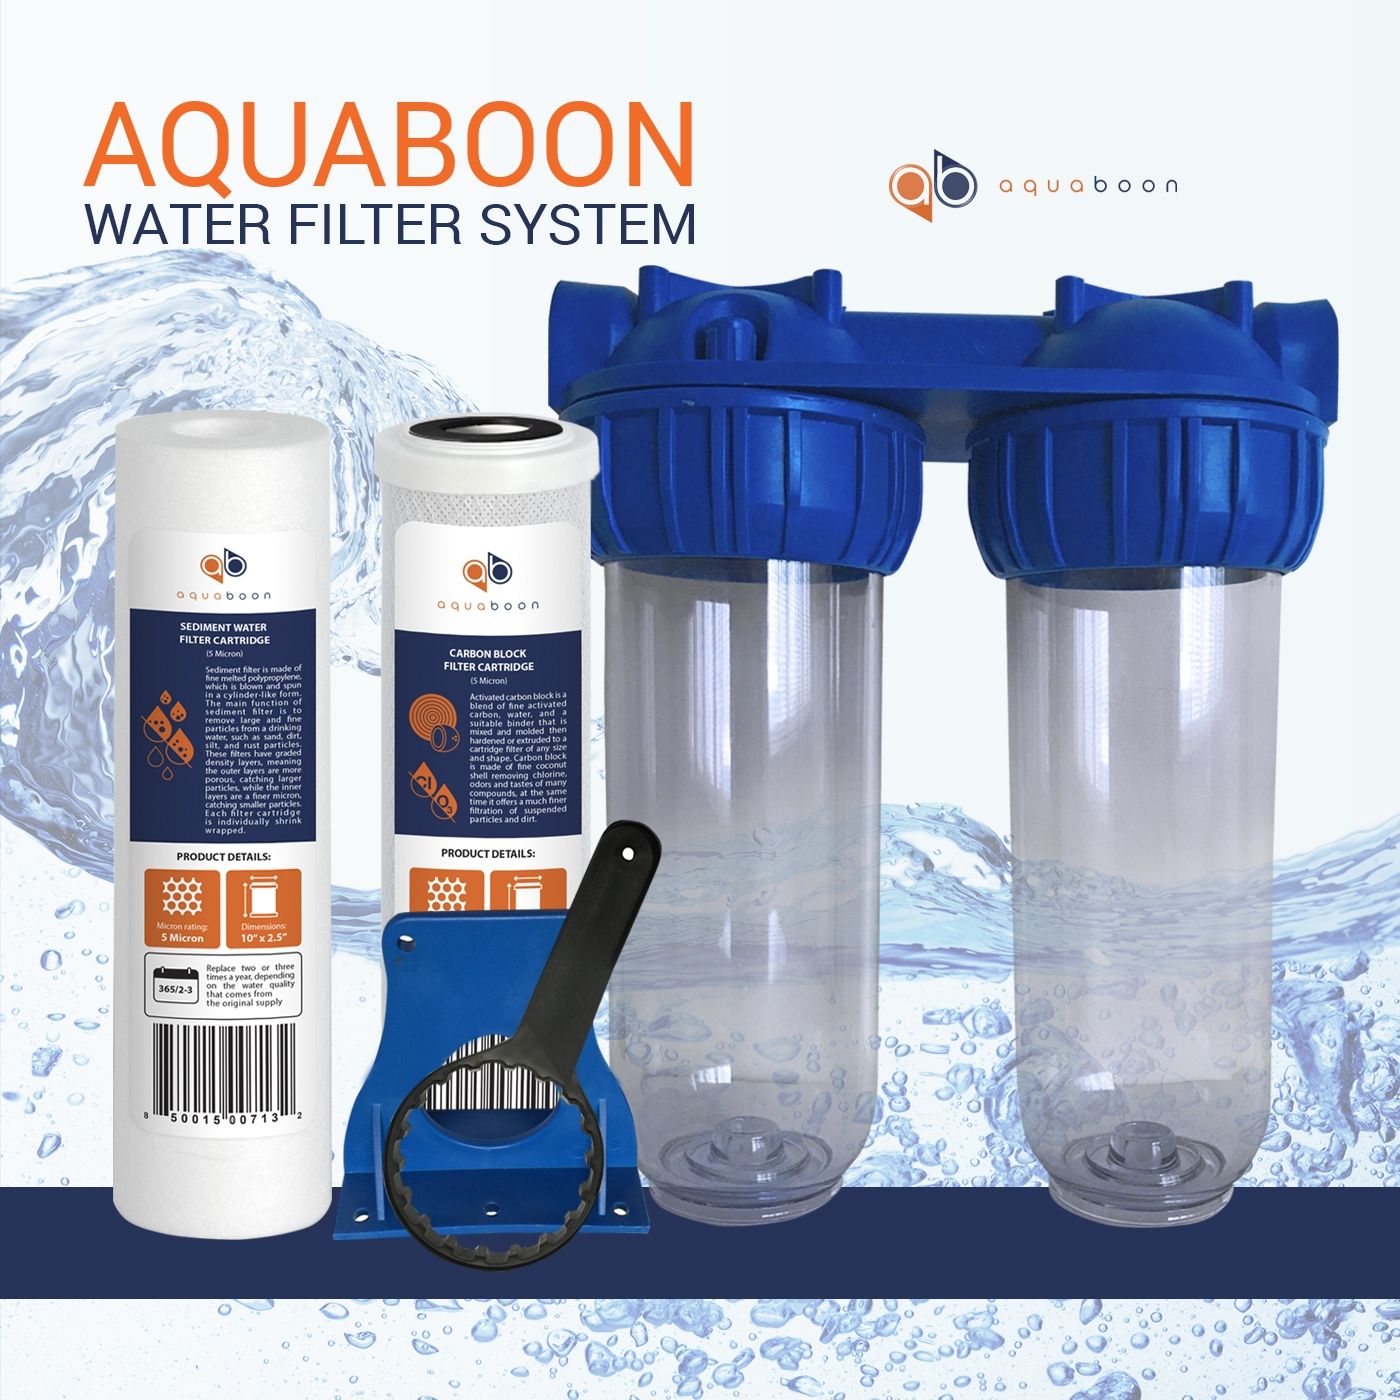 Includes Sediment &Carbon Filters Aquaboon 2-Stage 10" Water Filtration System 